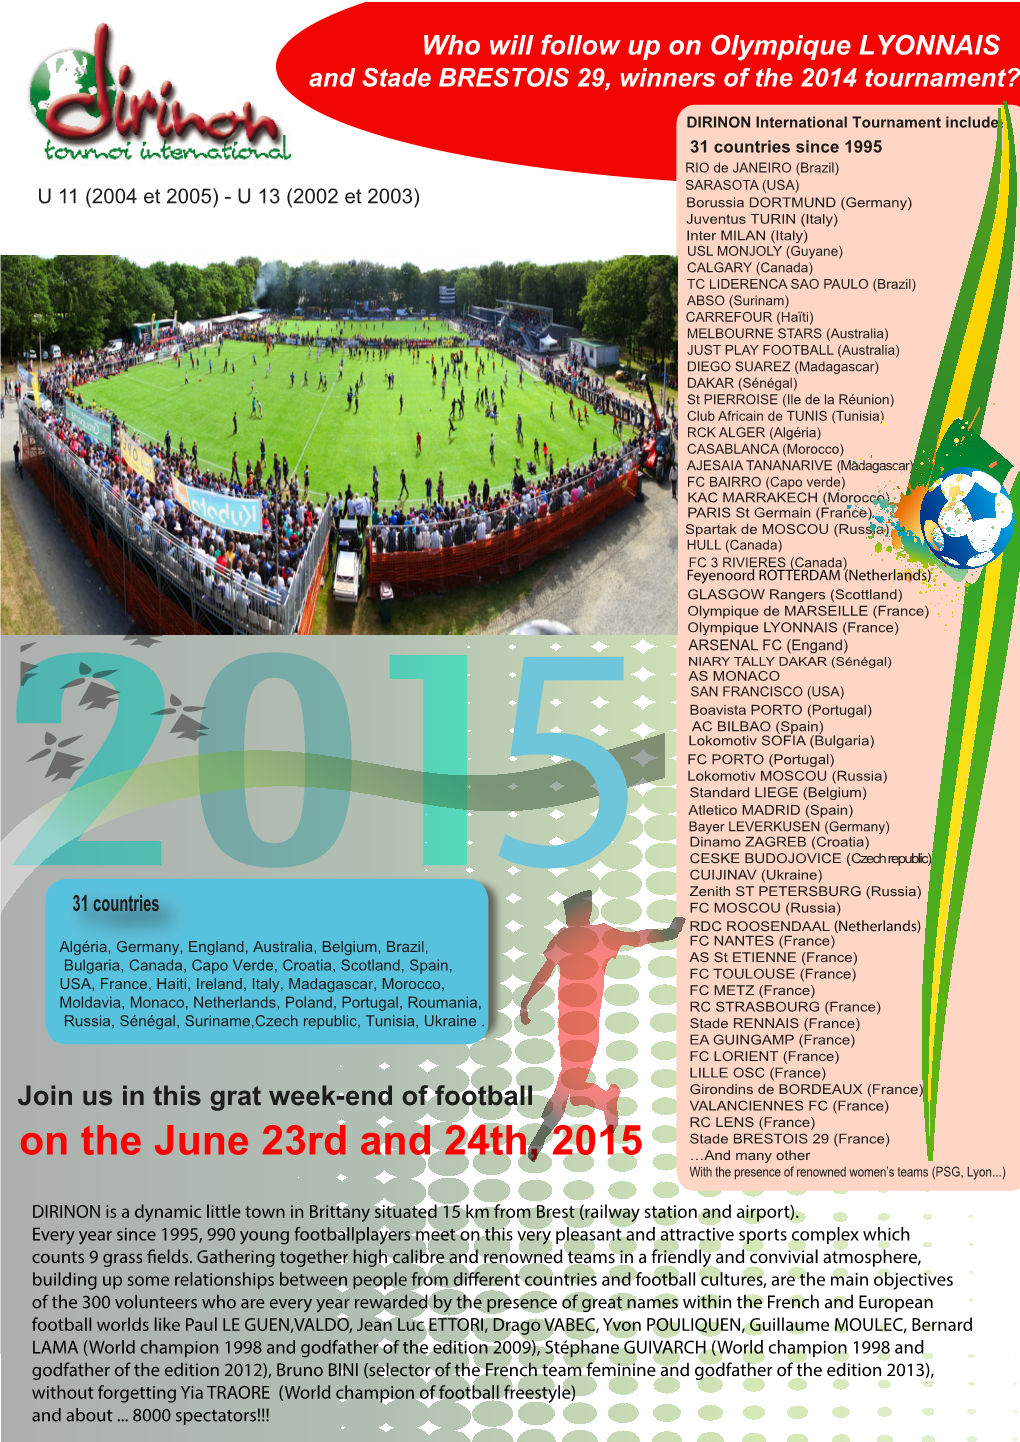 On the June 23Rd and 24Th, 2015 …And Many Other with the Presence of Renowned Women’S Teams (PSG, Lyon...)